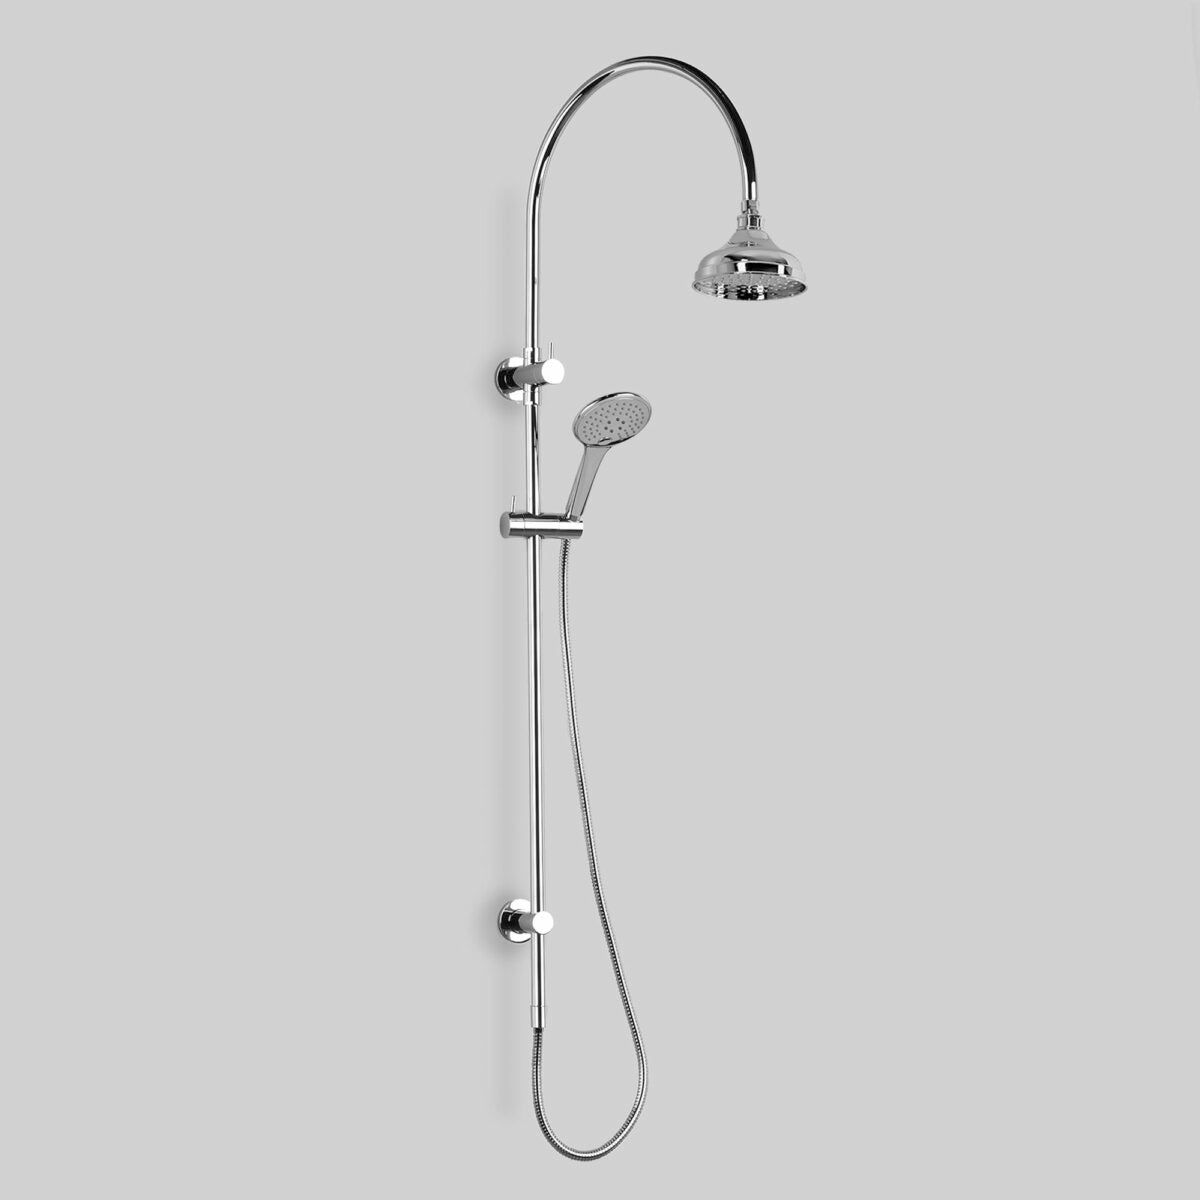 Olde English Signature Exposed Shower with Integrated Diverter with 150mm Rose & Multi-Function Handpiece V4